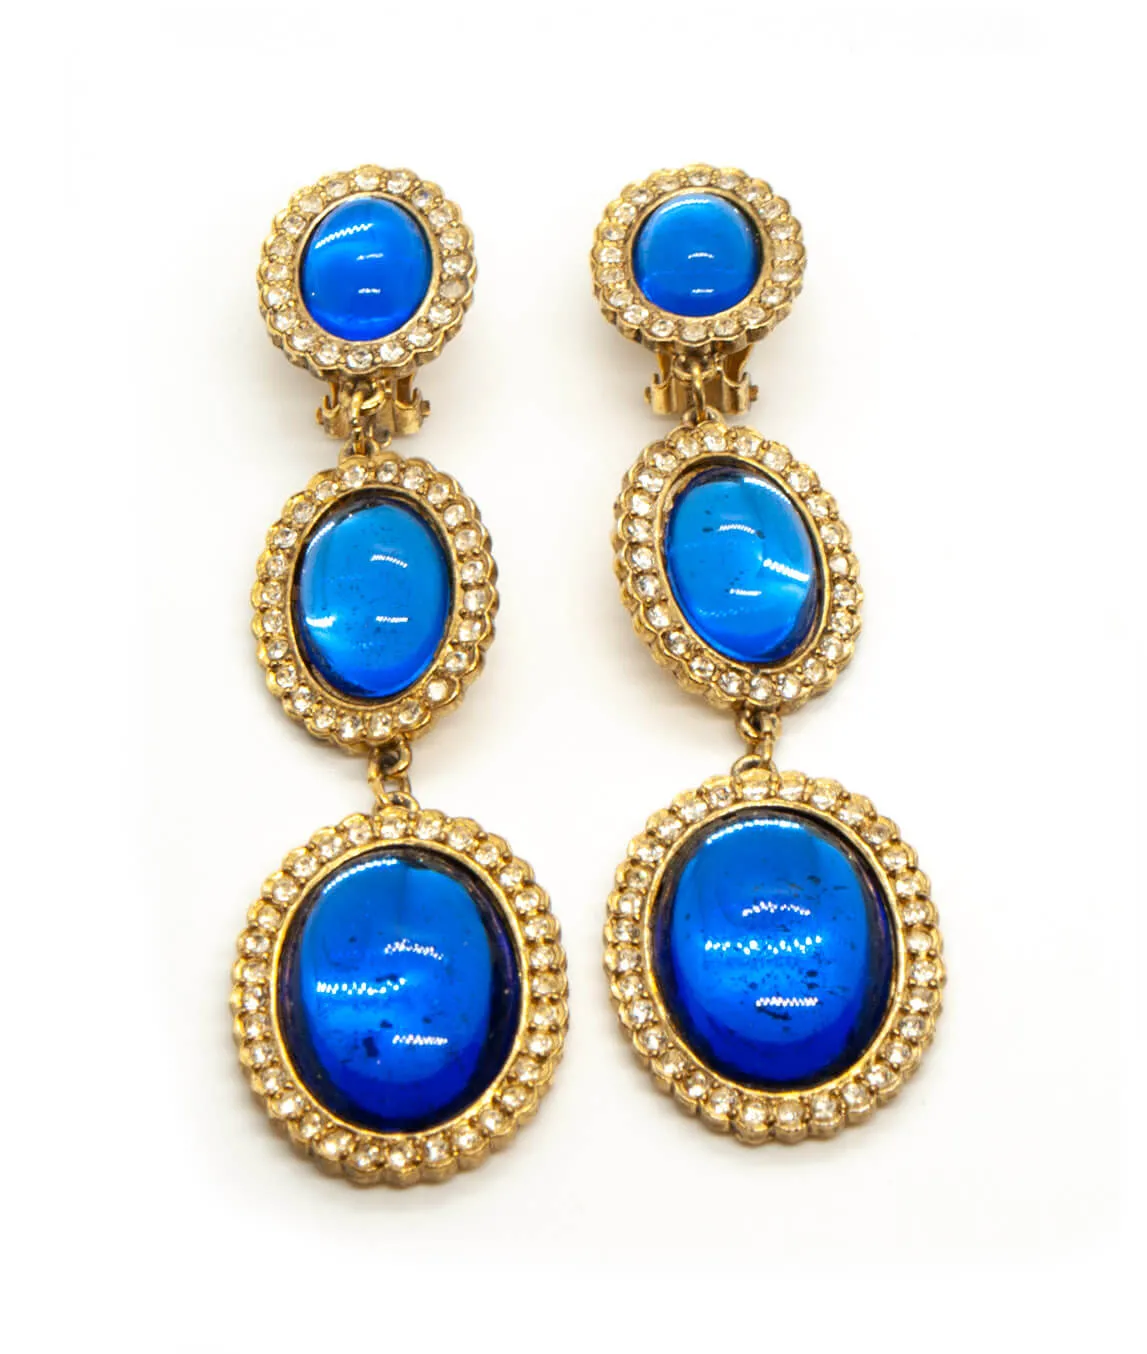 Vintage Butler & Wilson Blue and Gold Earrings